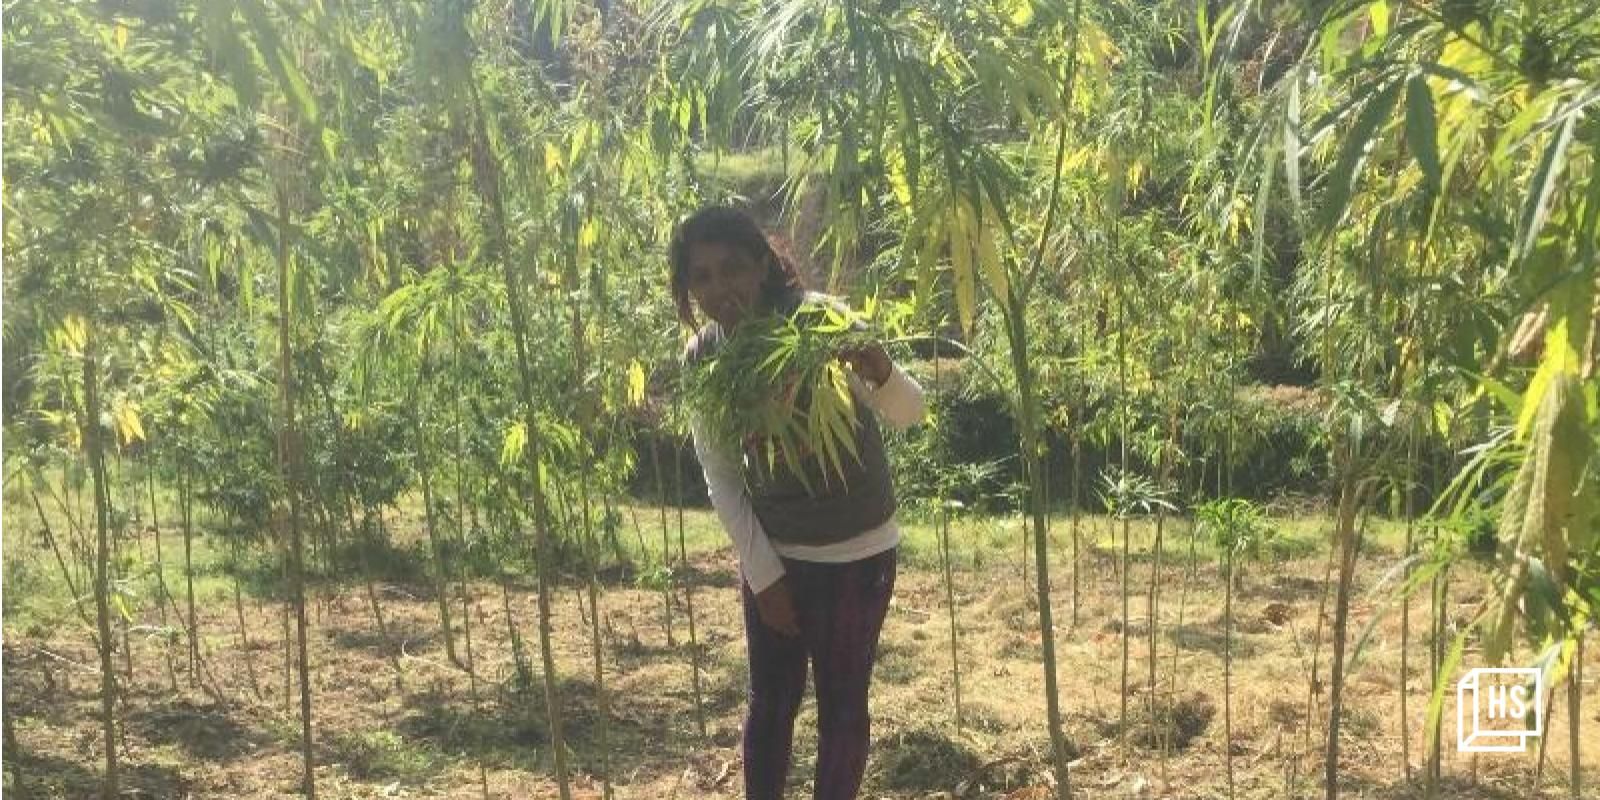 This woman entrepreneur’s interest in industrial hemp led to her start an eco-friendly venture 